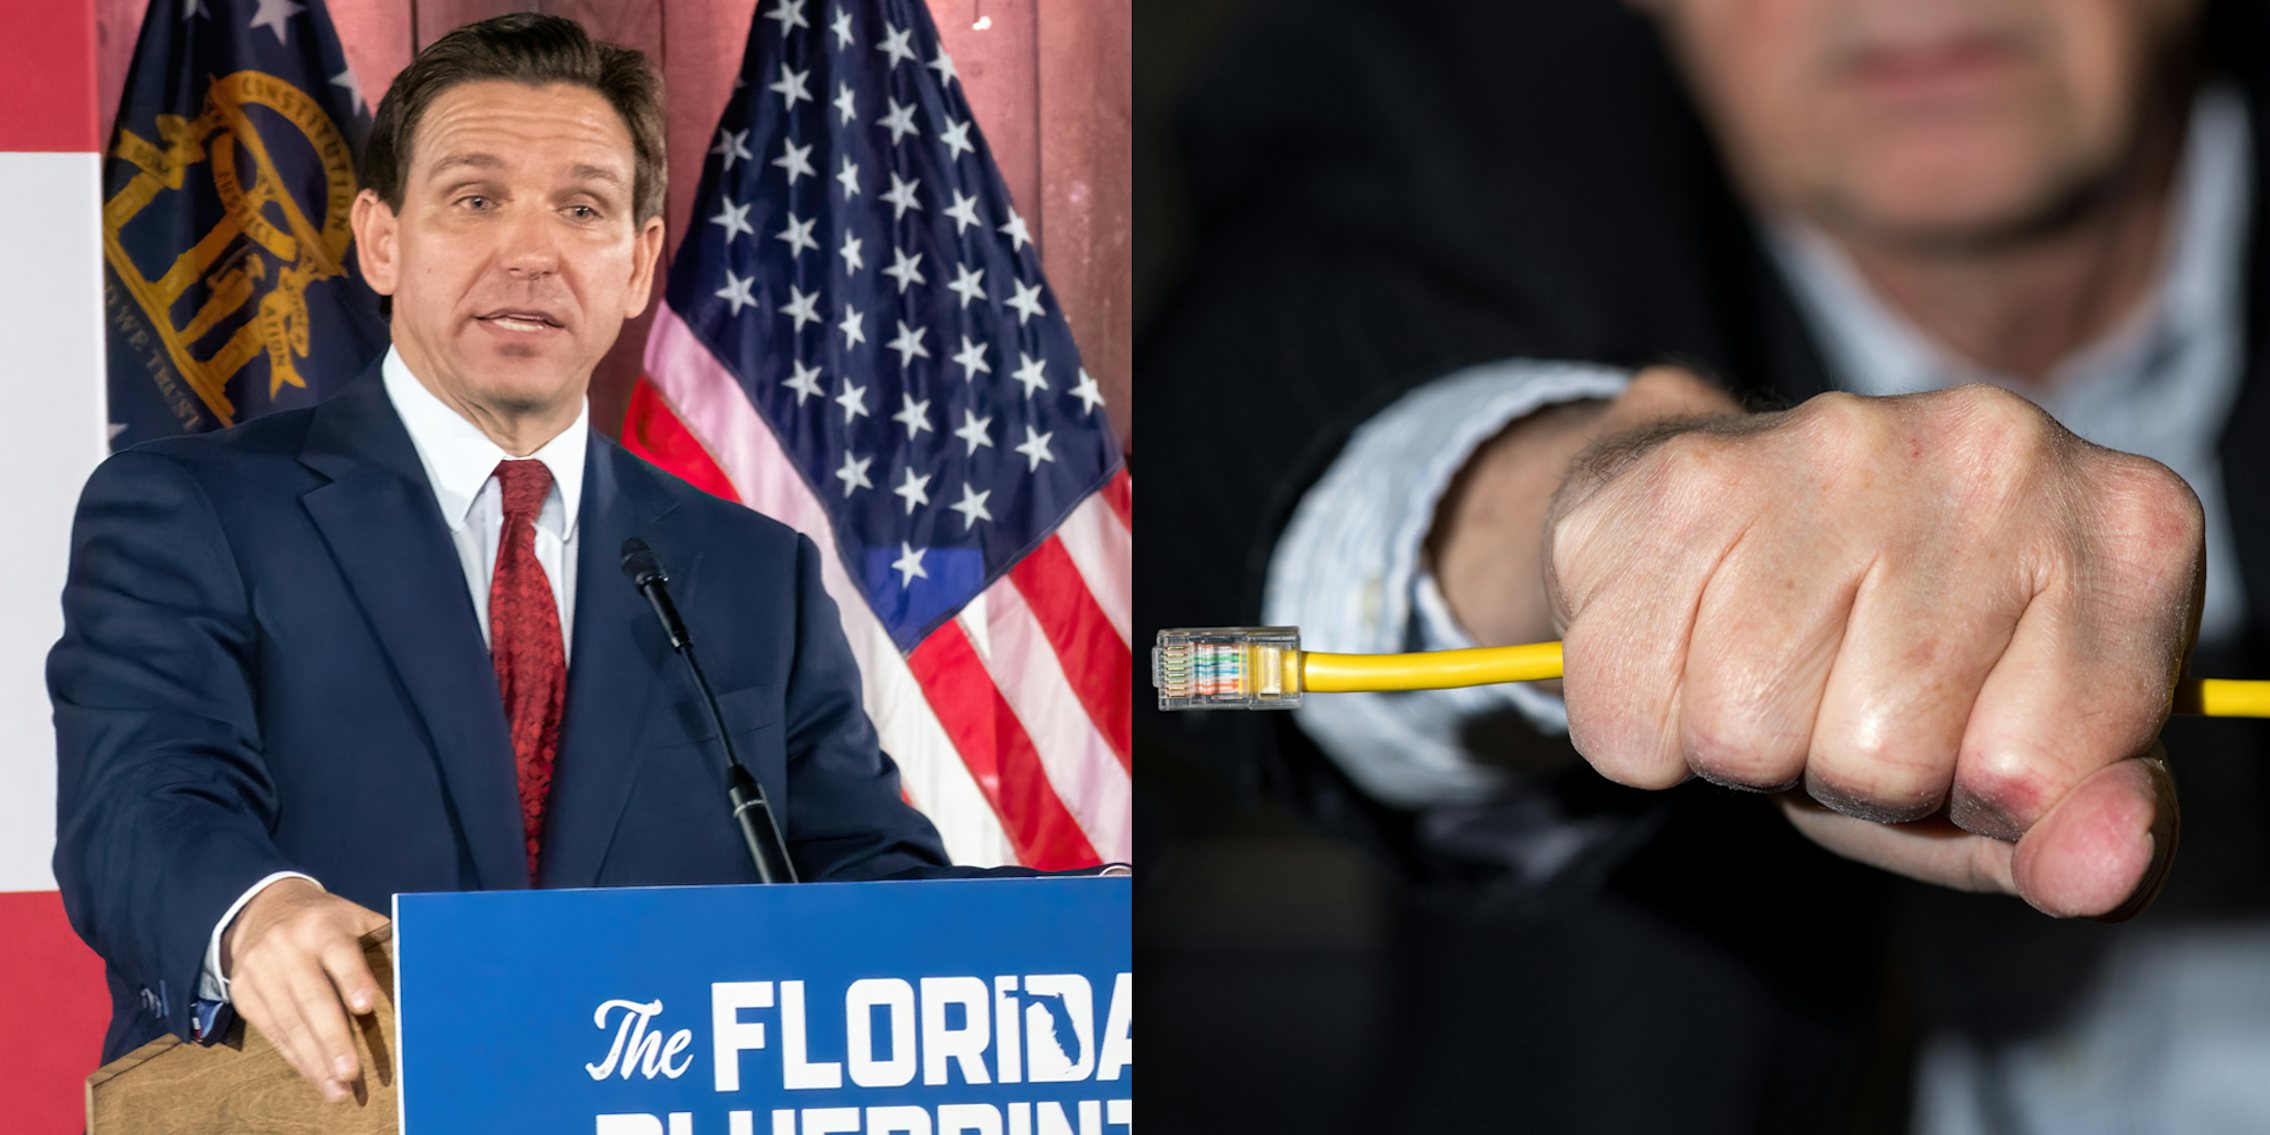 Ron DeSantis speaking in front of American flag (l) man holding Ethernet cable Net Neutrality concept (r)